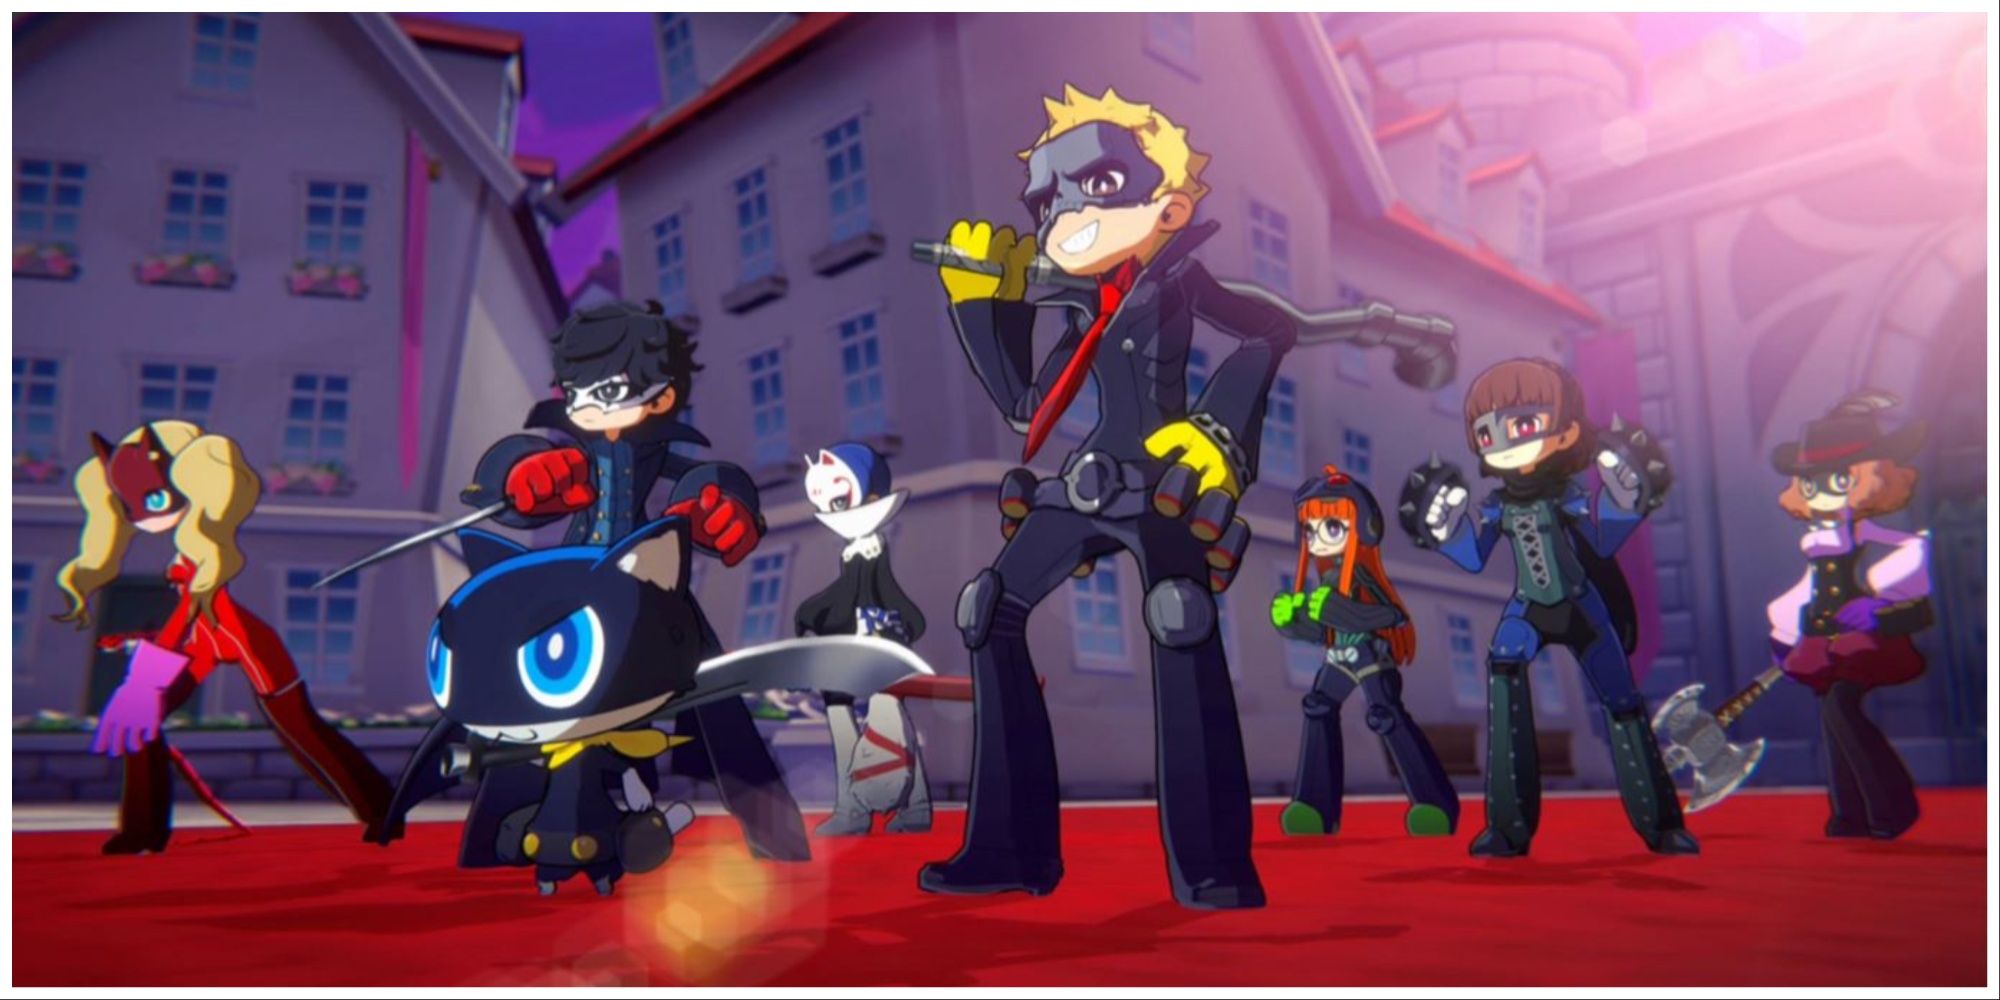 The Phantom Thieves about to engage an enemy